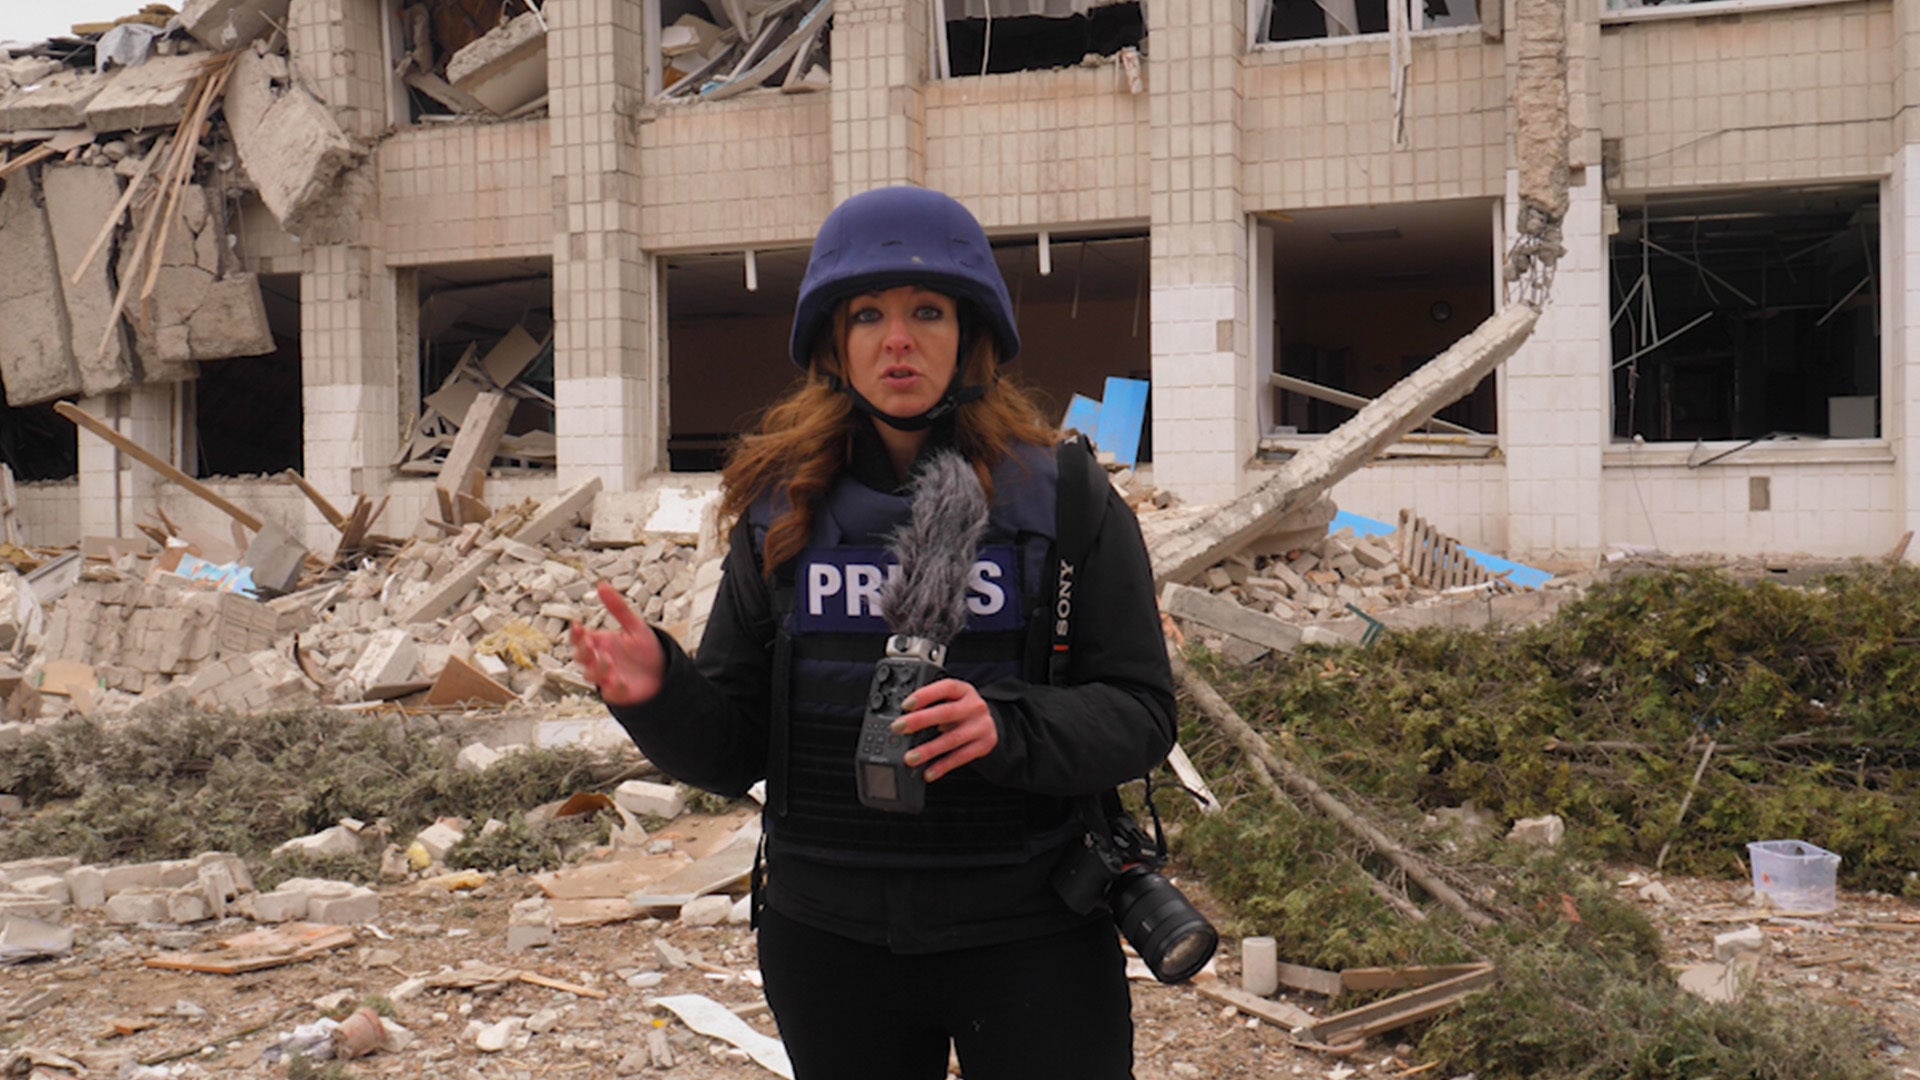 Our international correspondent Bel Trew reporting from the shelled Ukrainian city of Zhytomyr